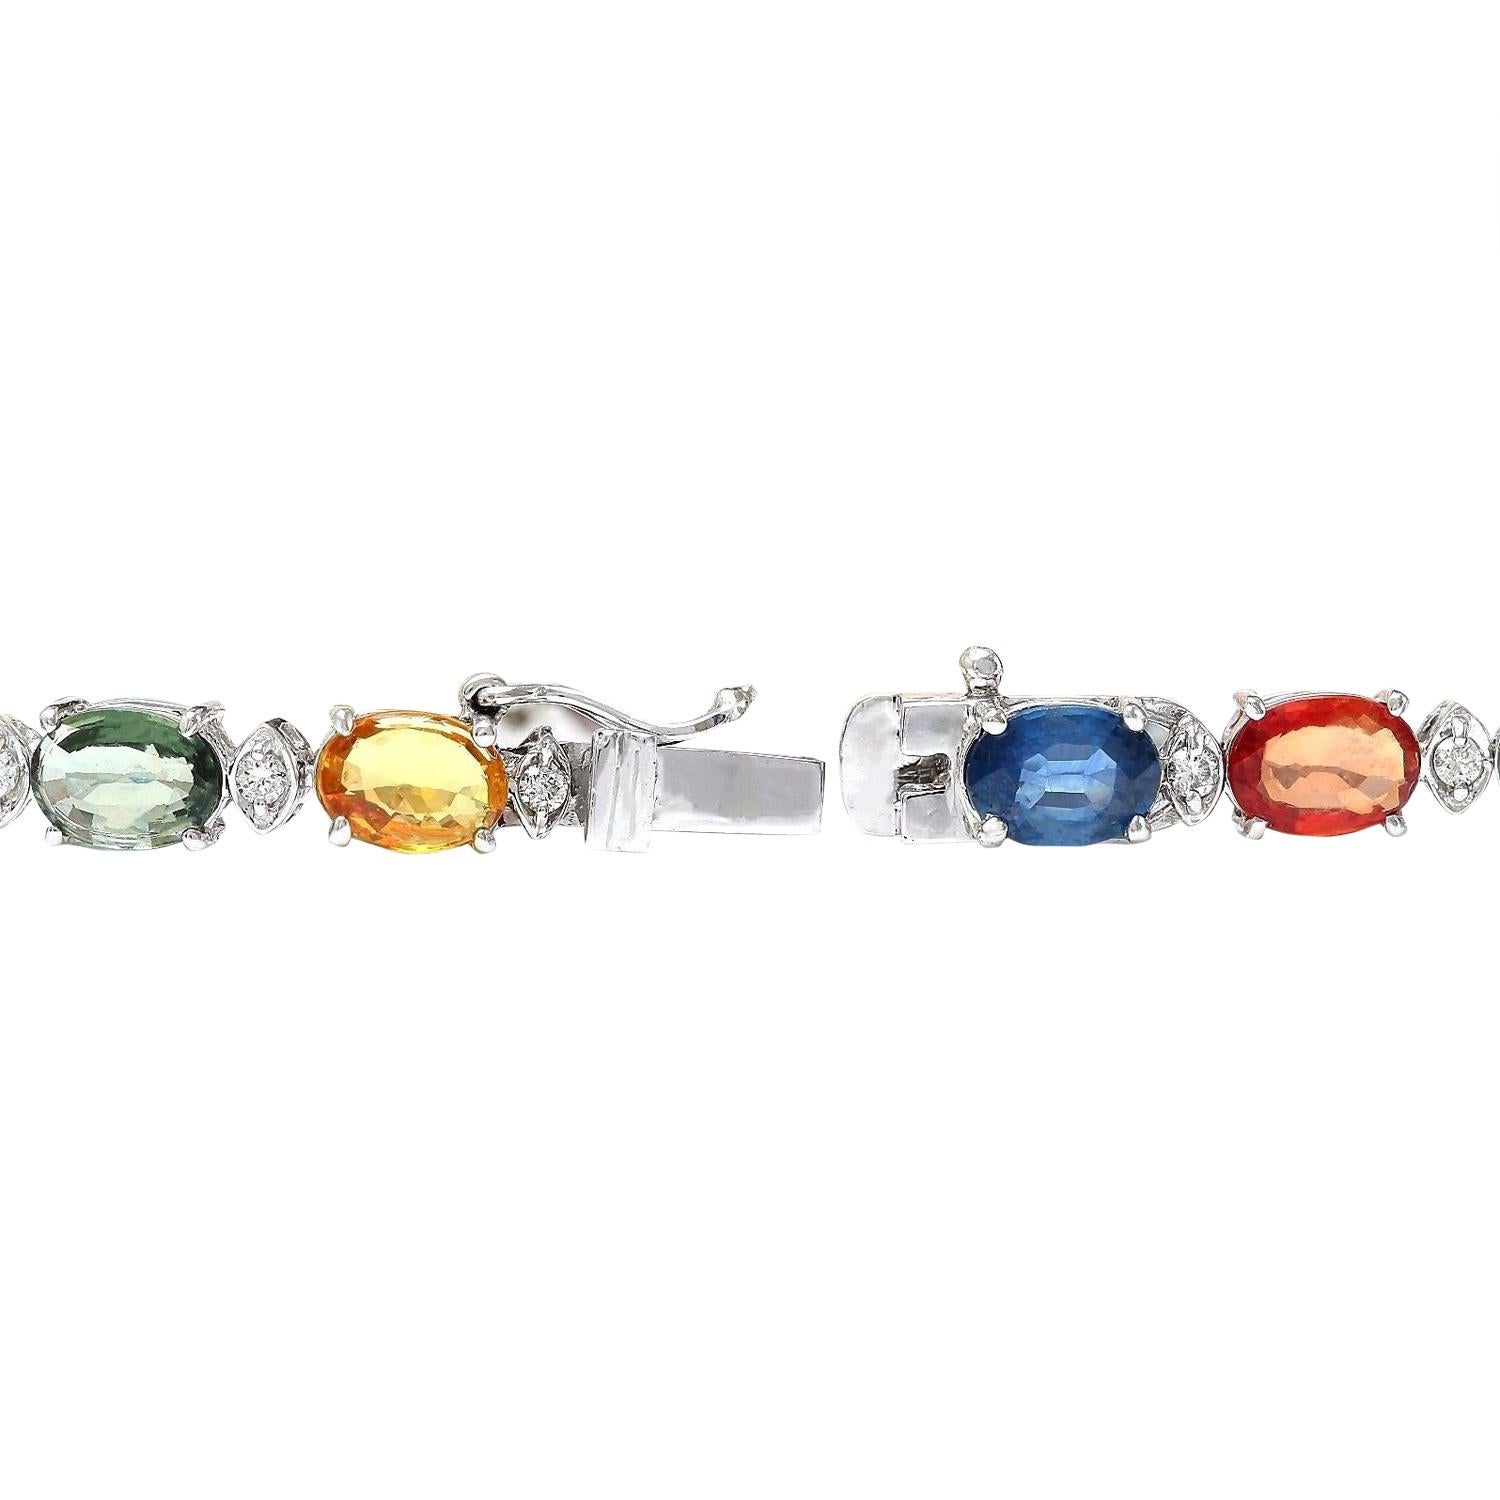 17.43 Carat Natural Sapphire 14K Solid White Gold Diamond Bracelet
 Item Type: Bracelet
 Item Style: Tennis
 Item Length: 7 Inches
 Item Width: 4.00 mm
 Material: 14K White Gold
 Mainstone: Sapphire
 Stone Color: Multicolor
 Stone Weight: 16.83